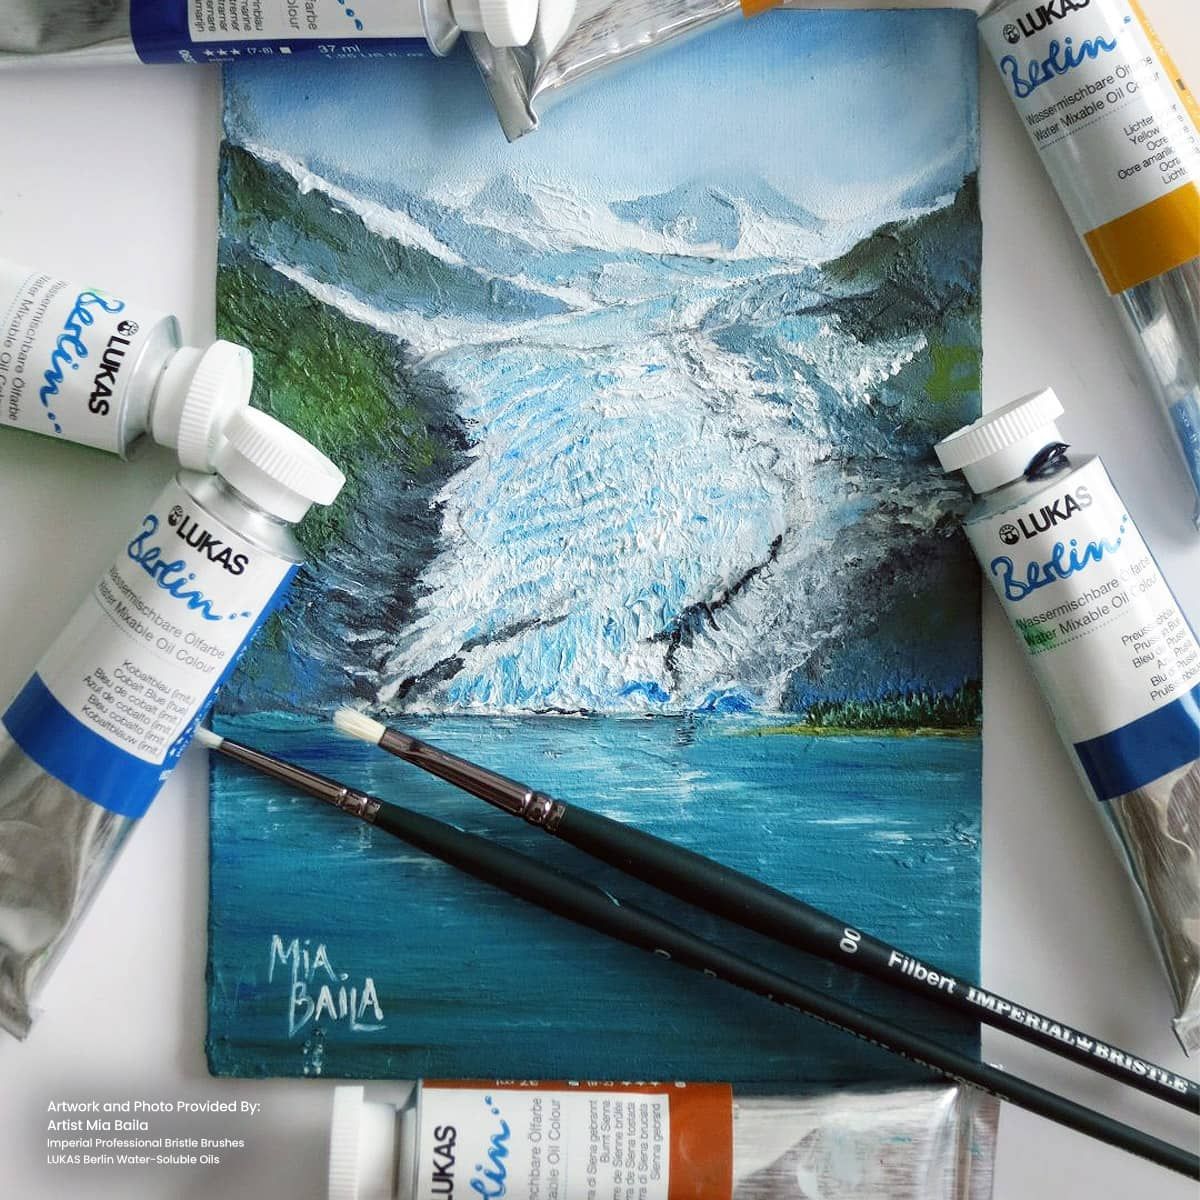 Imperial Brushes, Lukas Berlin Water-Soluble Oils by Artist Mia Baila